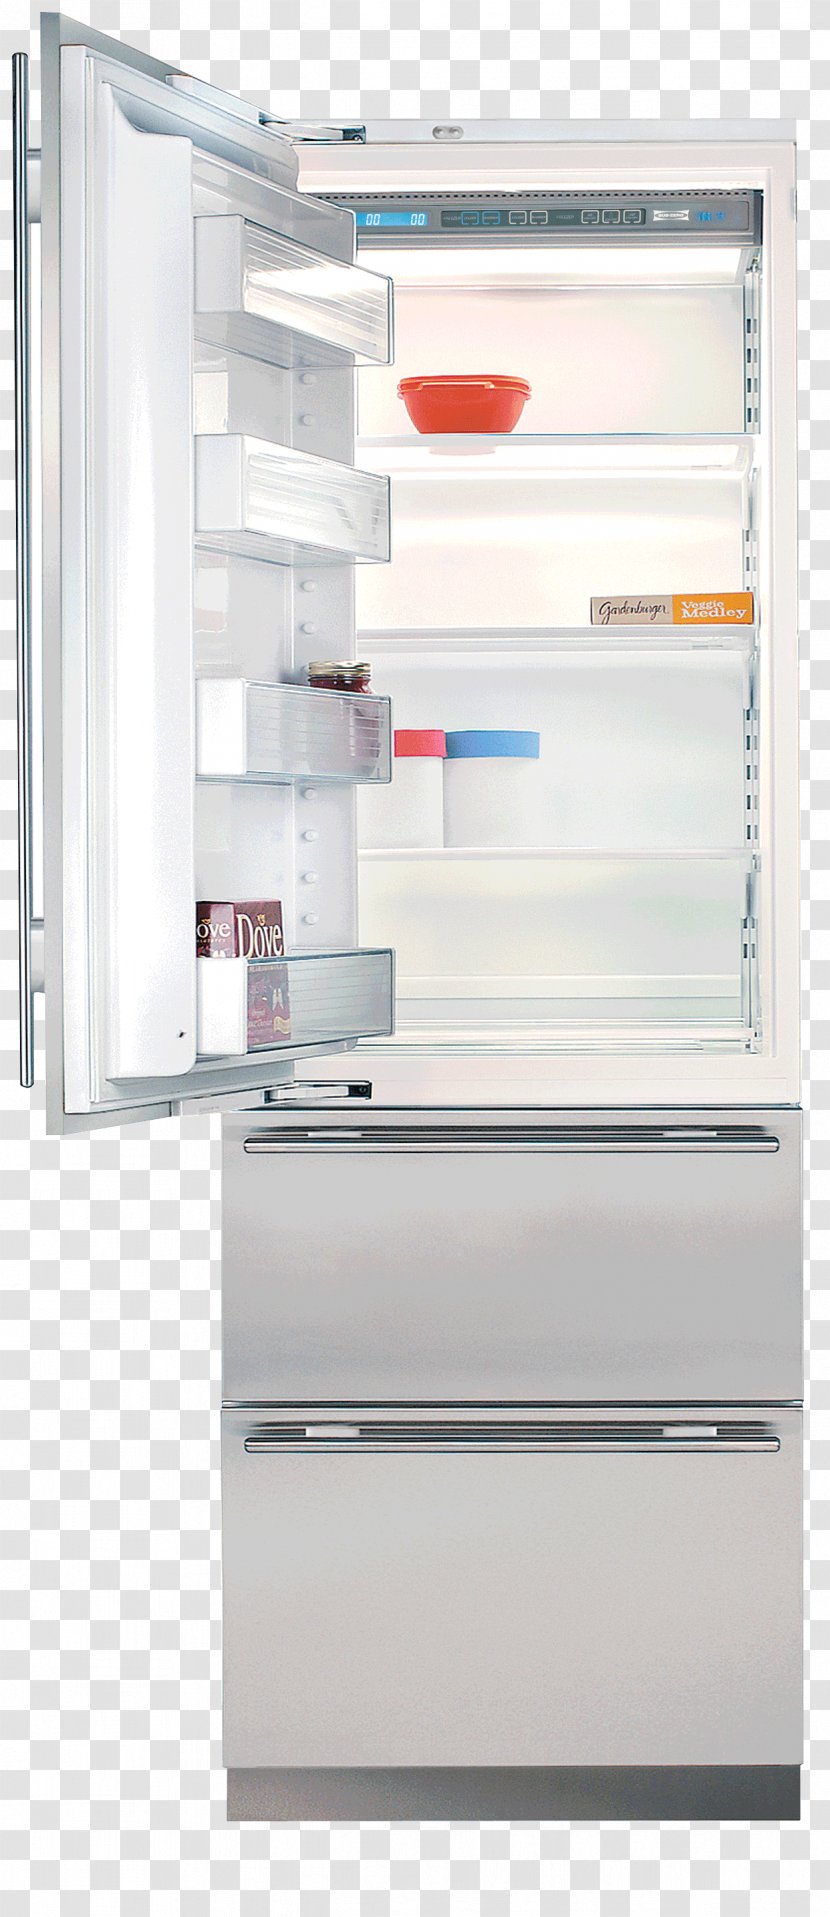 Sub-Zero Refrigerator Freezers Home Appliance Ice Makers - Autodefrost Transparent PNG